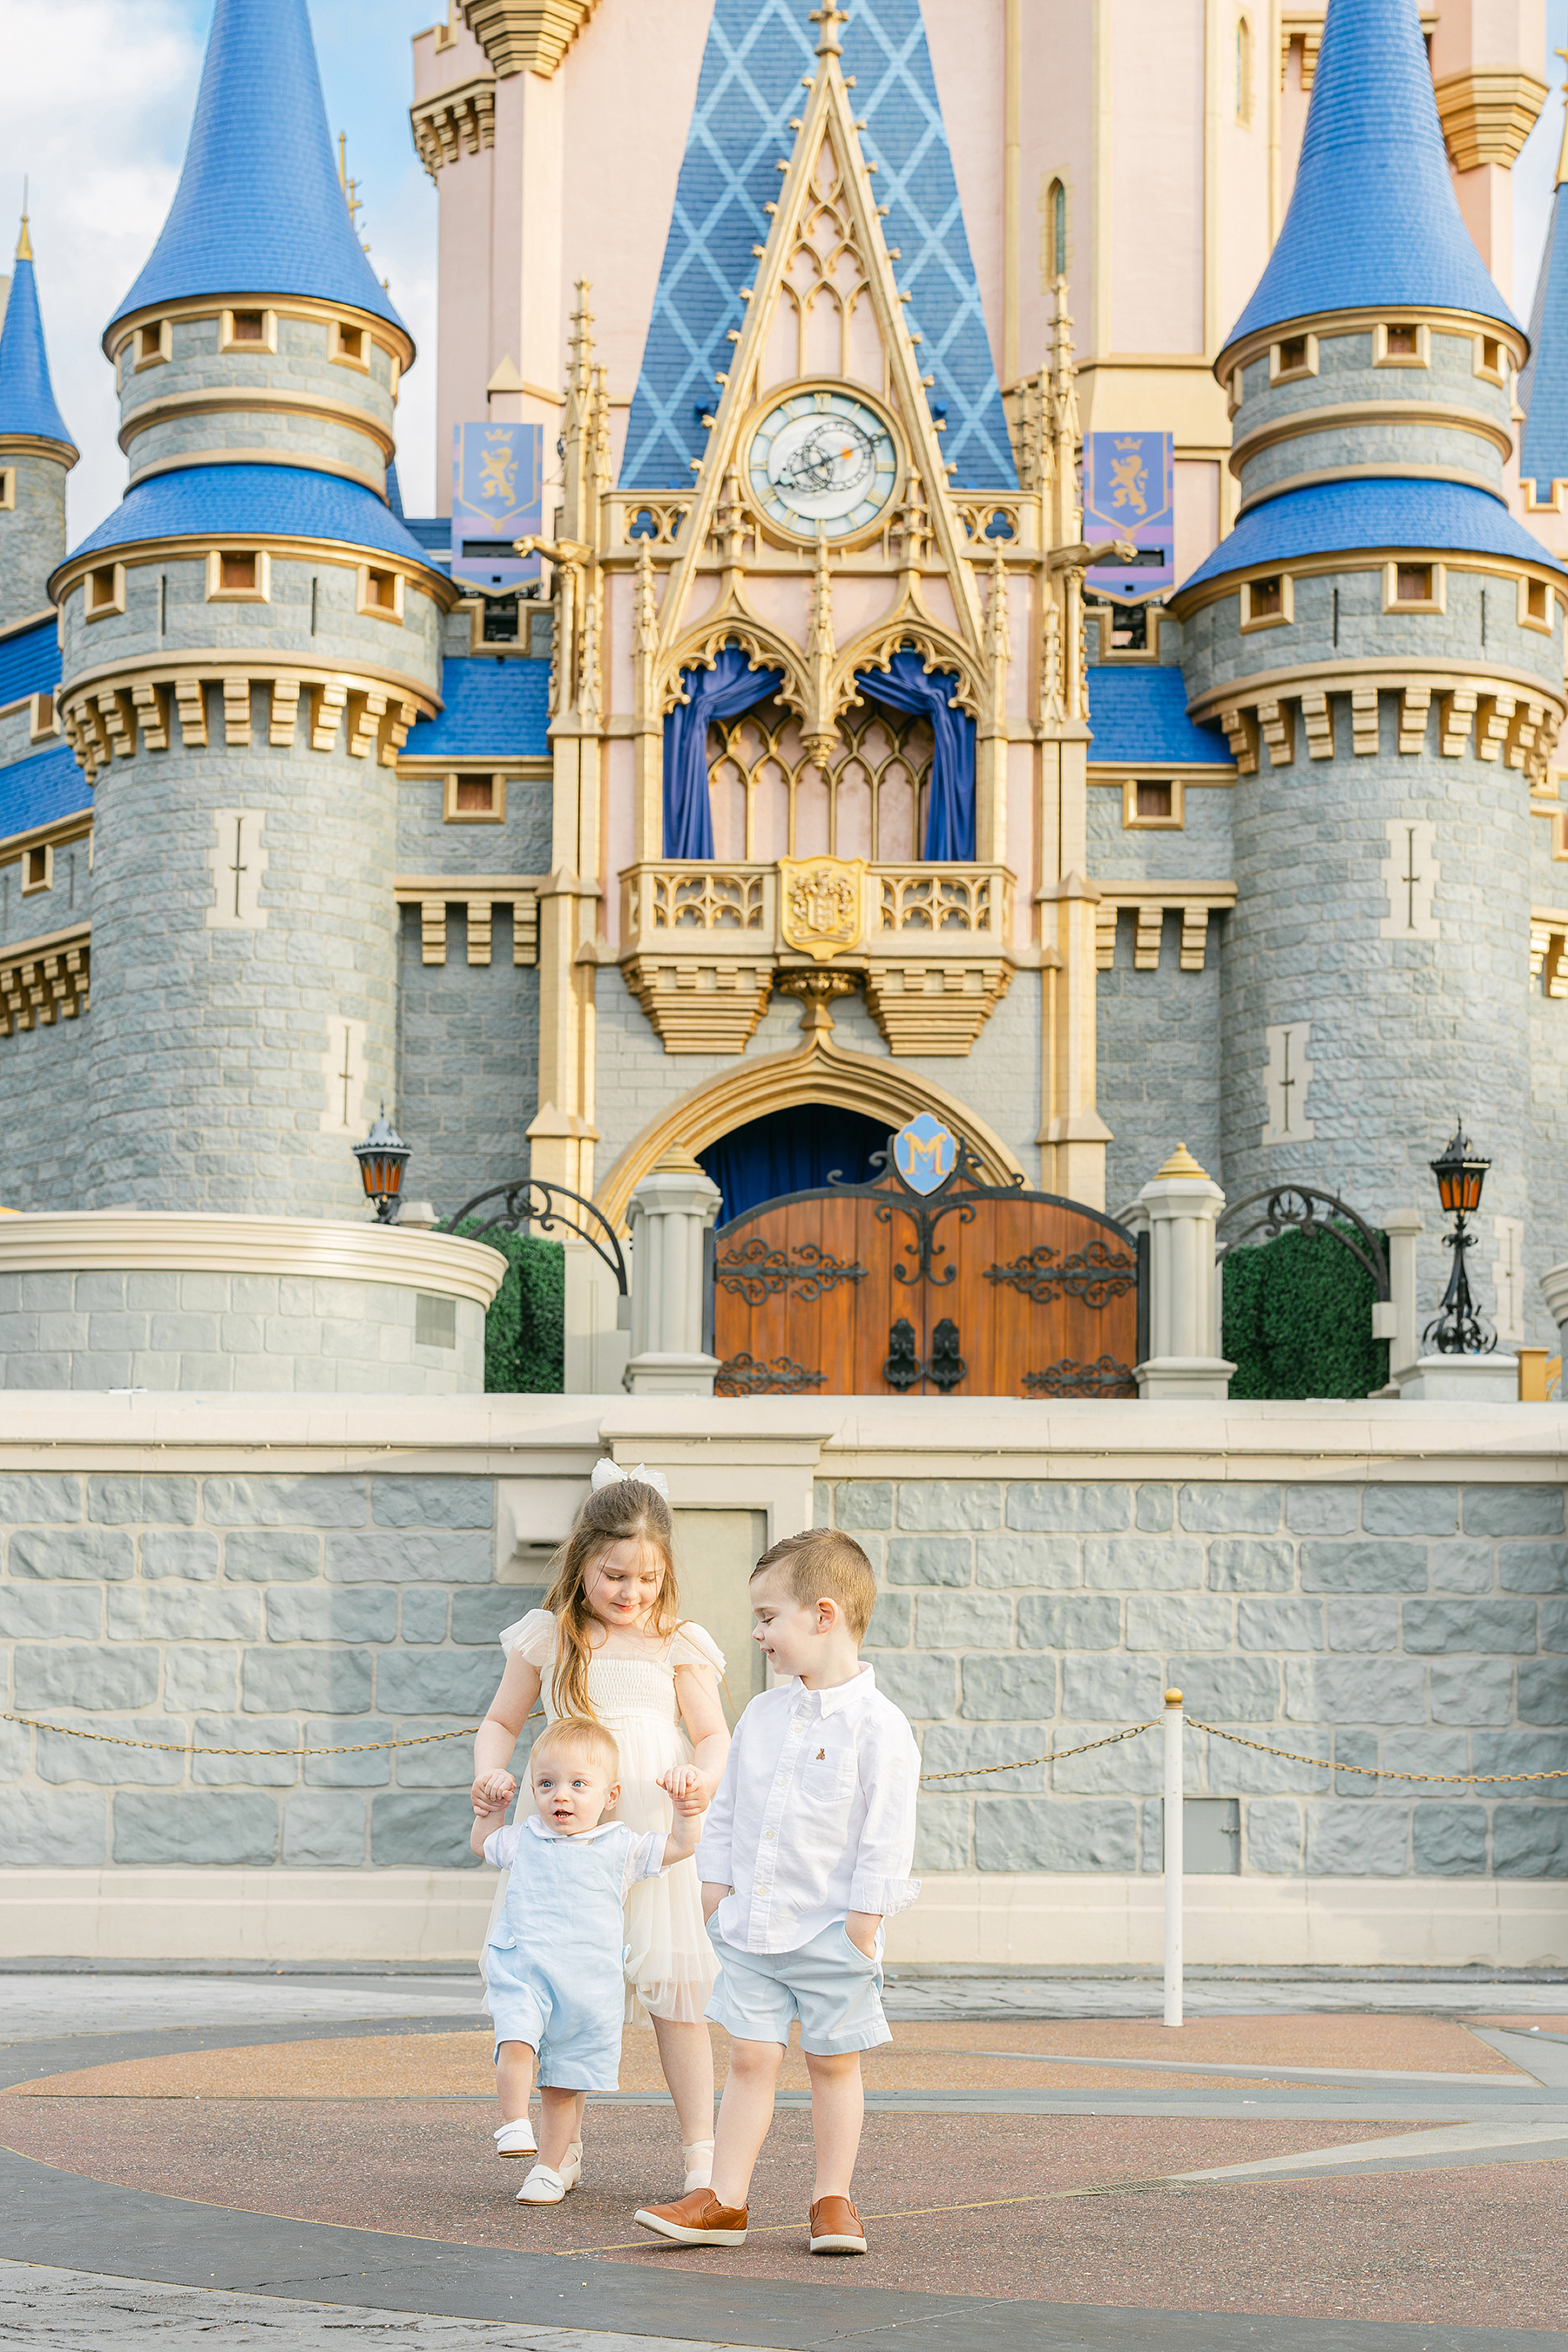 Three little children stand together in front of Cinderella's Castle.